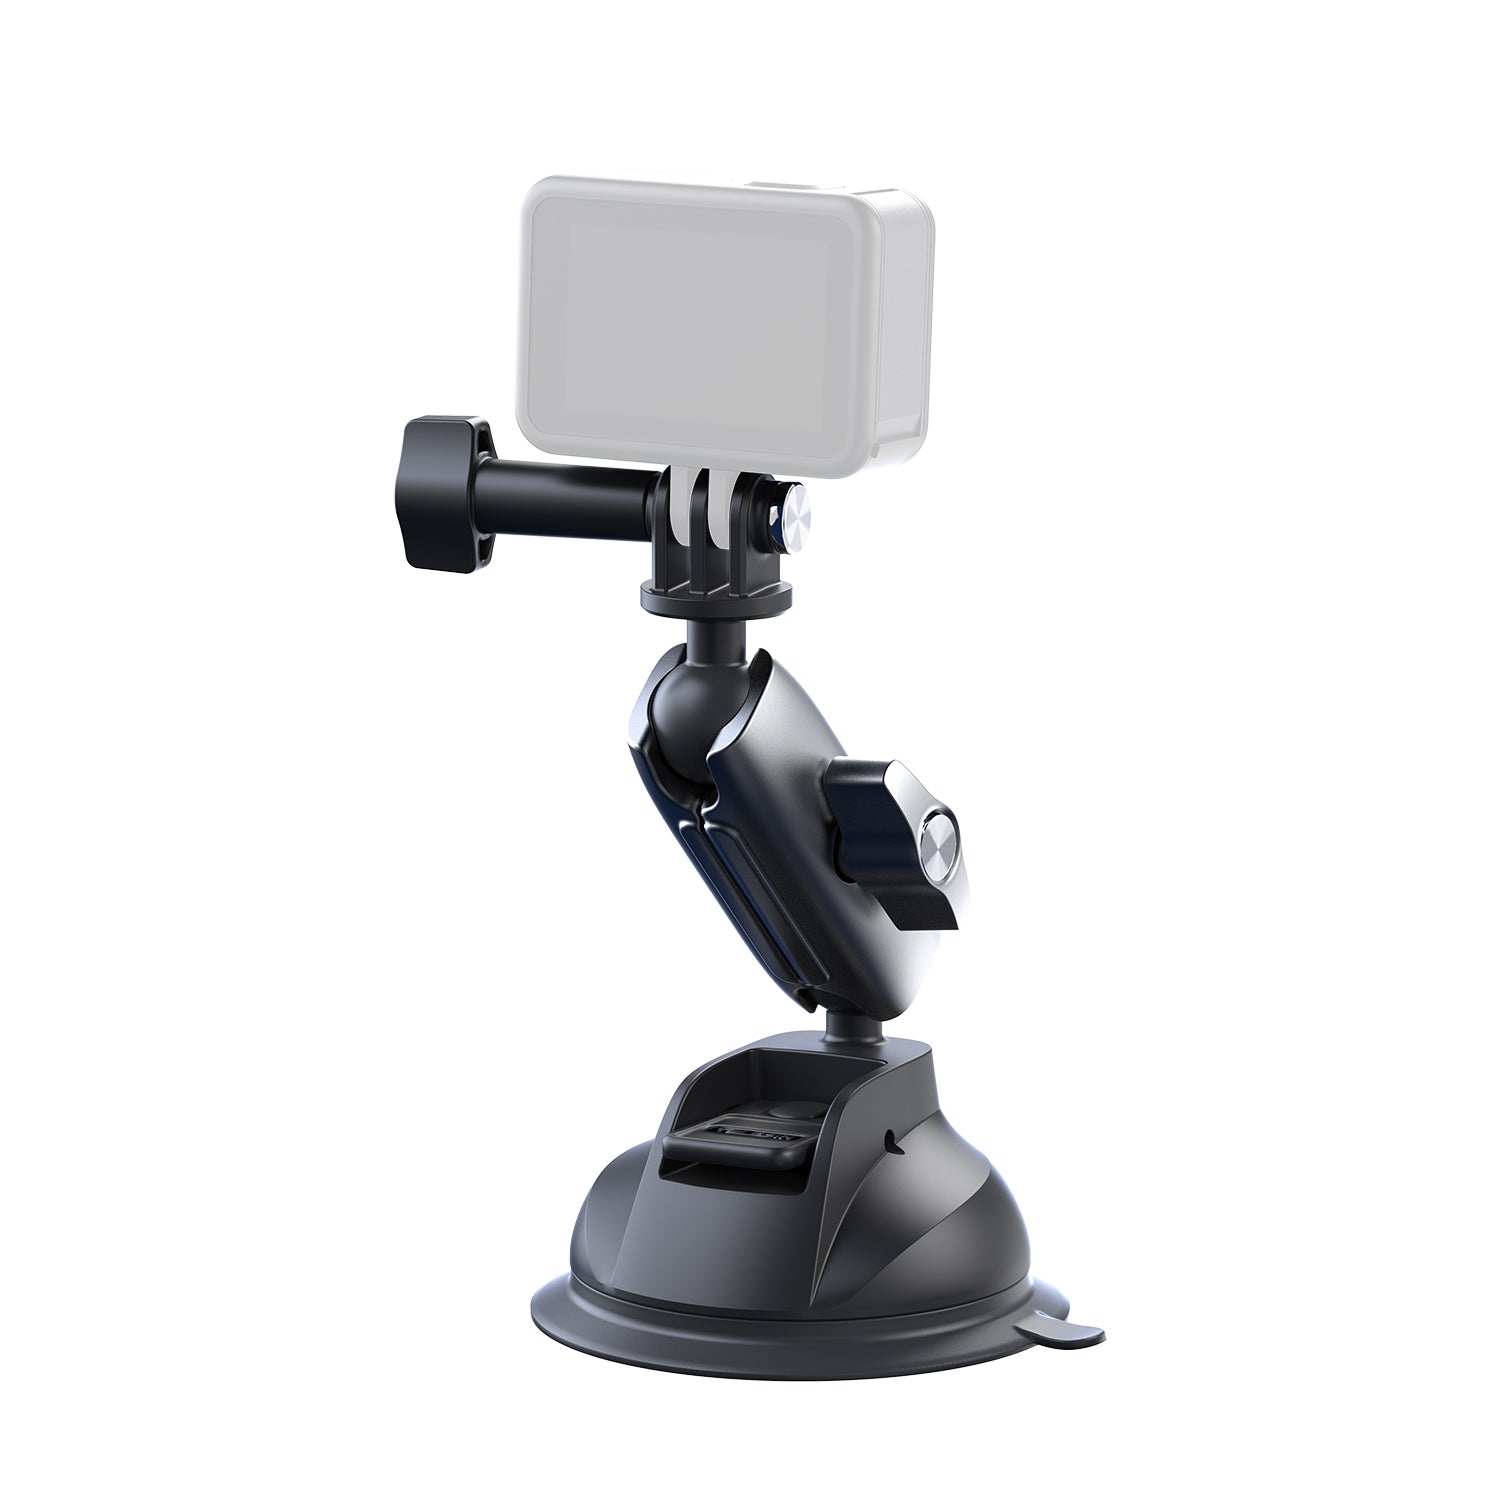 TELESIN Camera Suction Cup Mount